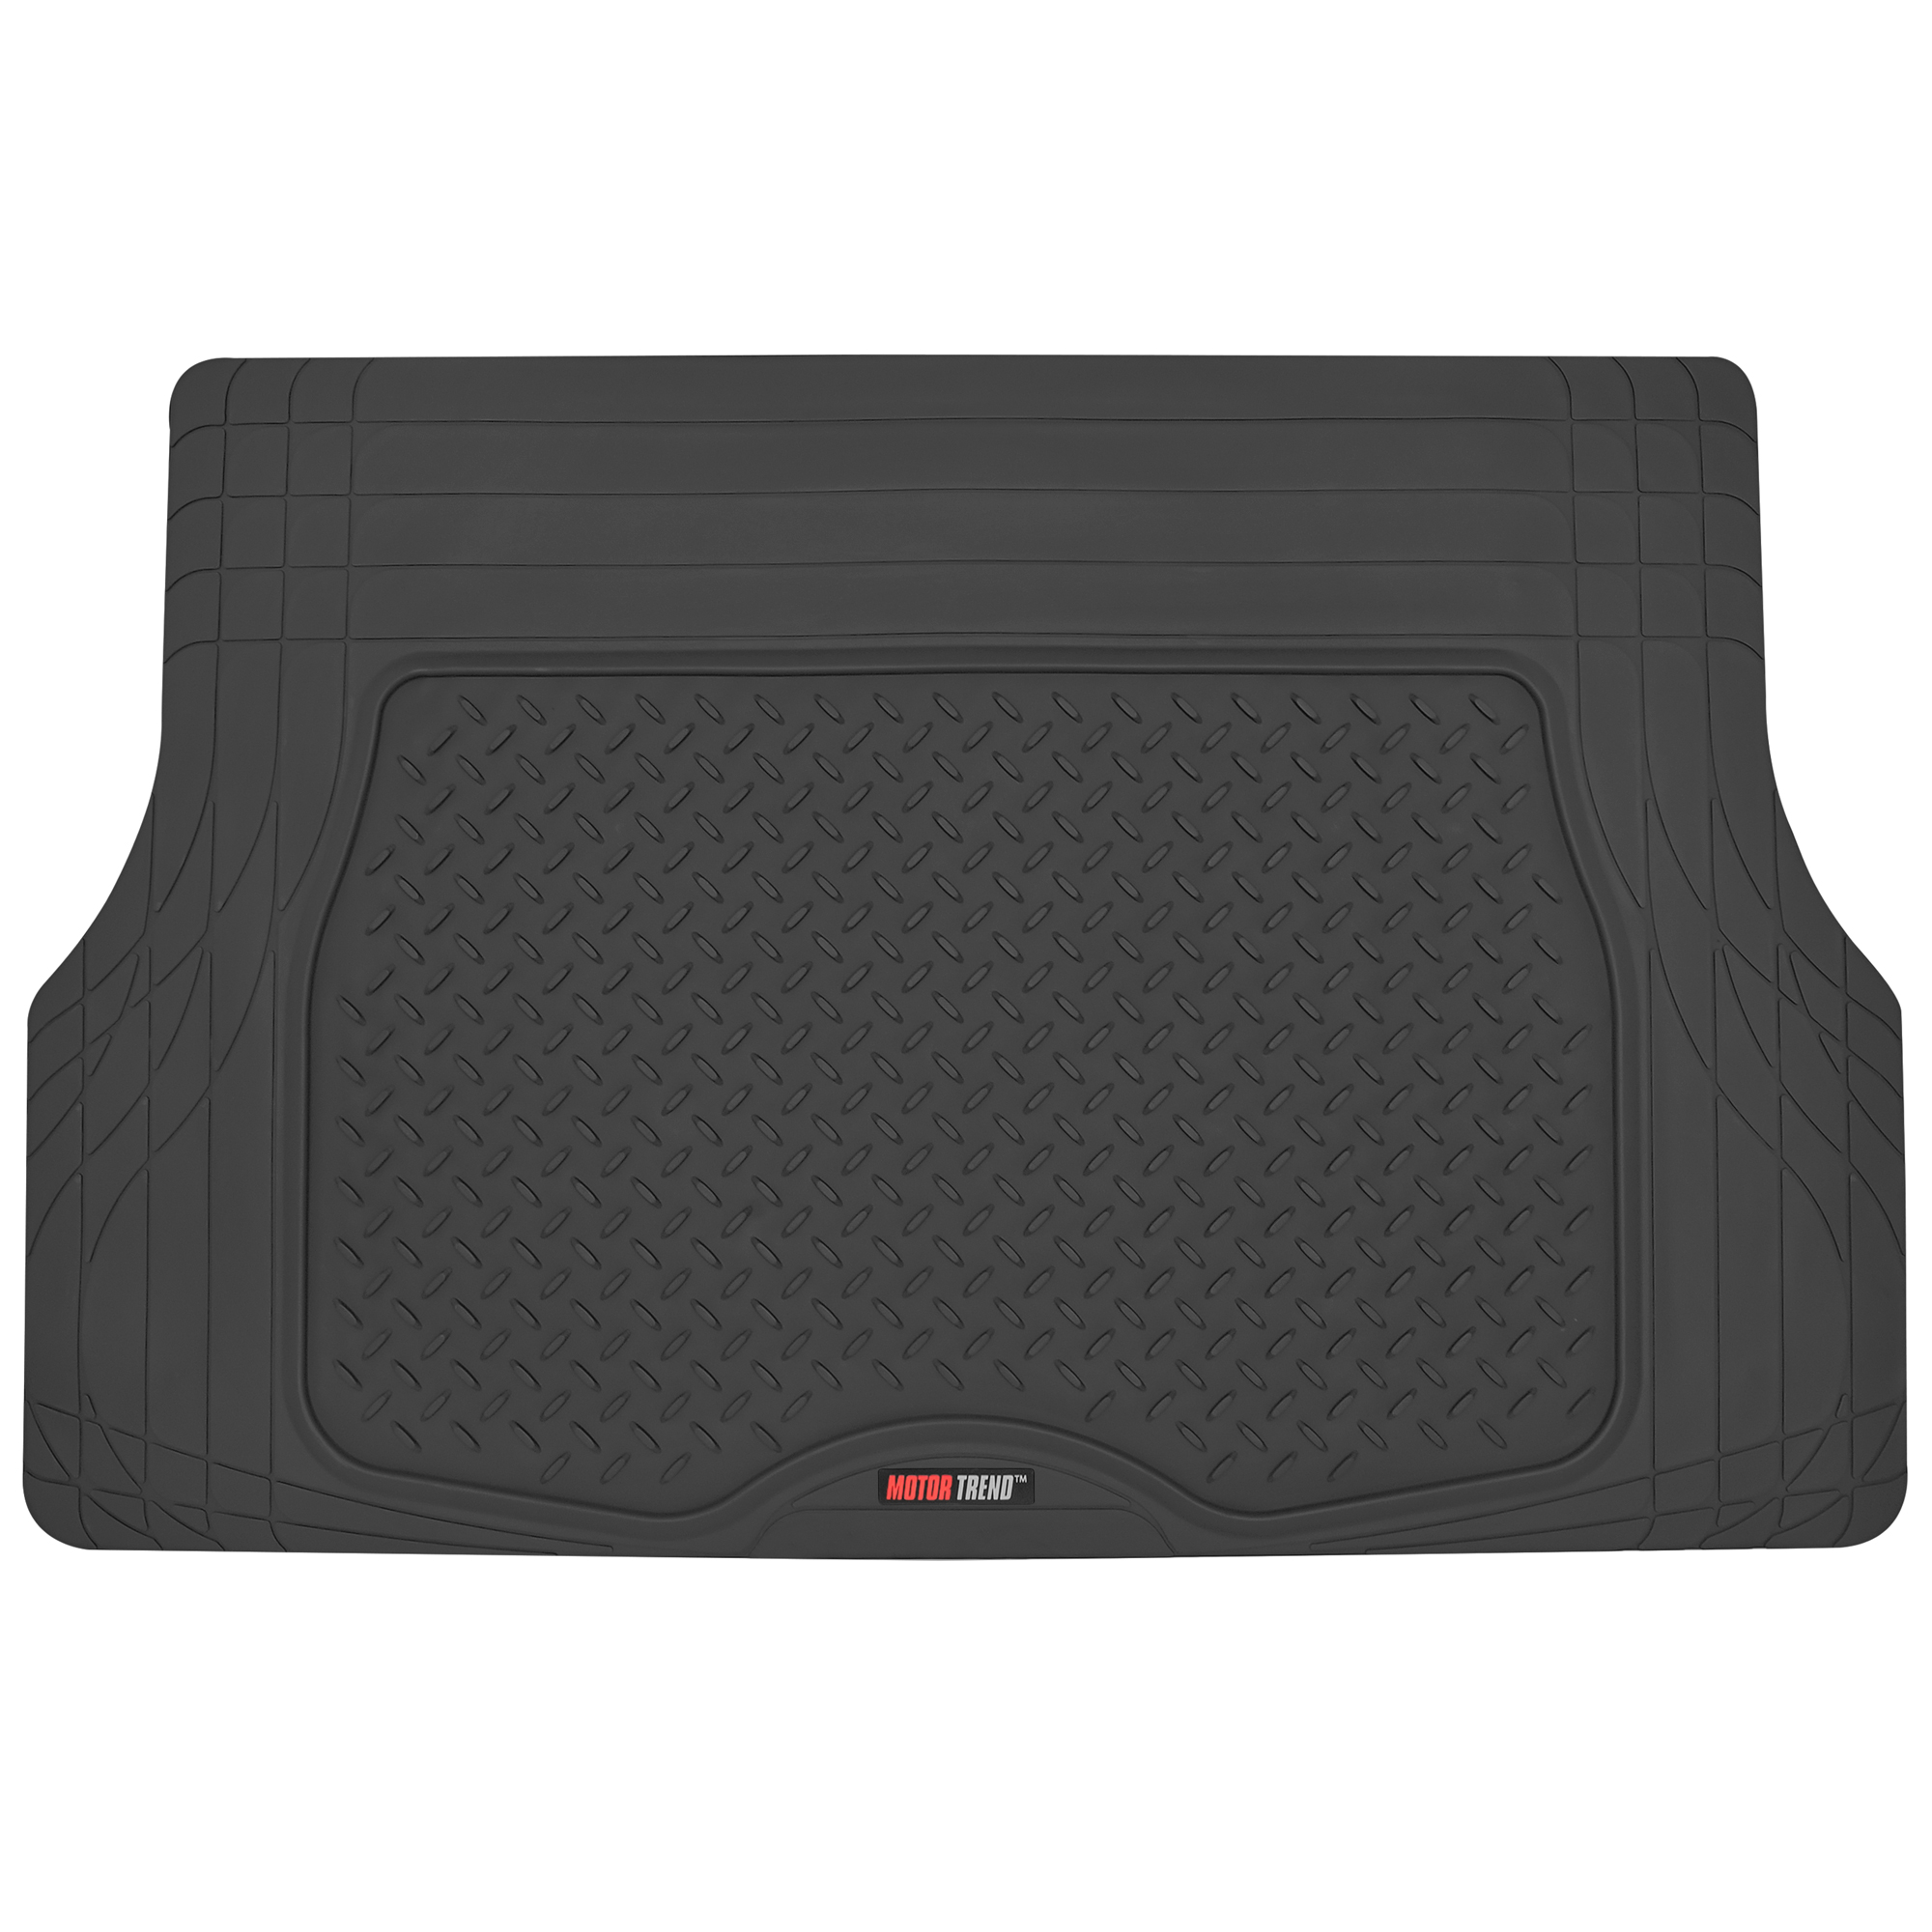 Motor Trend Heavy Duty Utility Cargo Liner Floor Mat, Trimmable to Fit Trunk, All Weather Protection - image 1 of 7